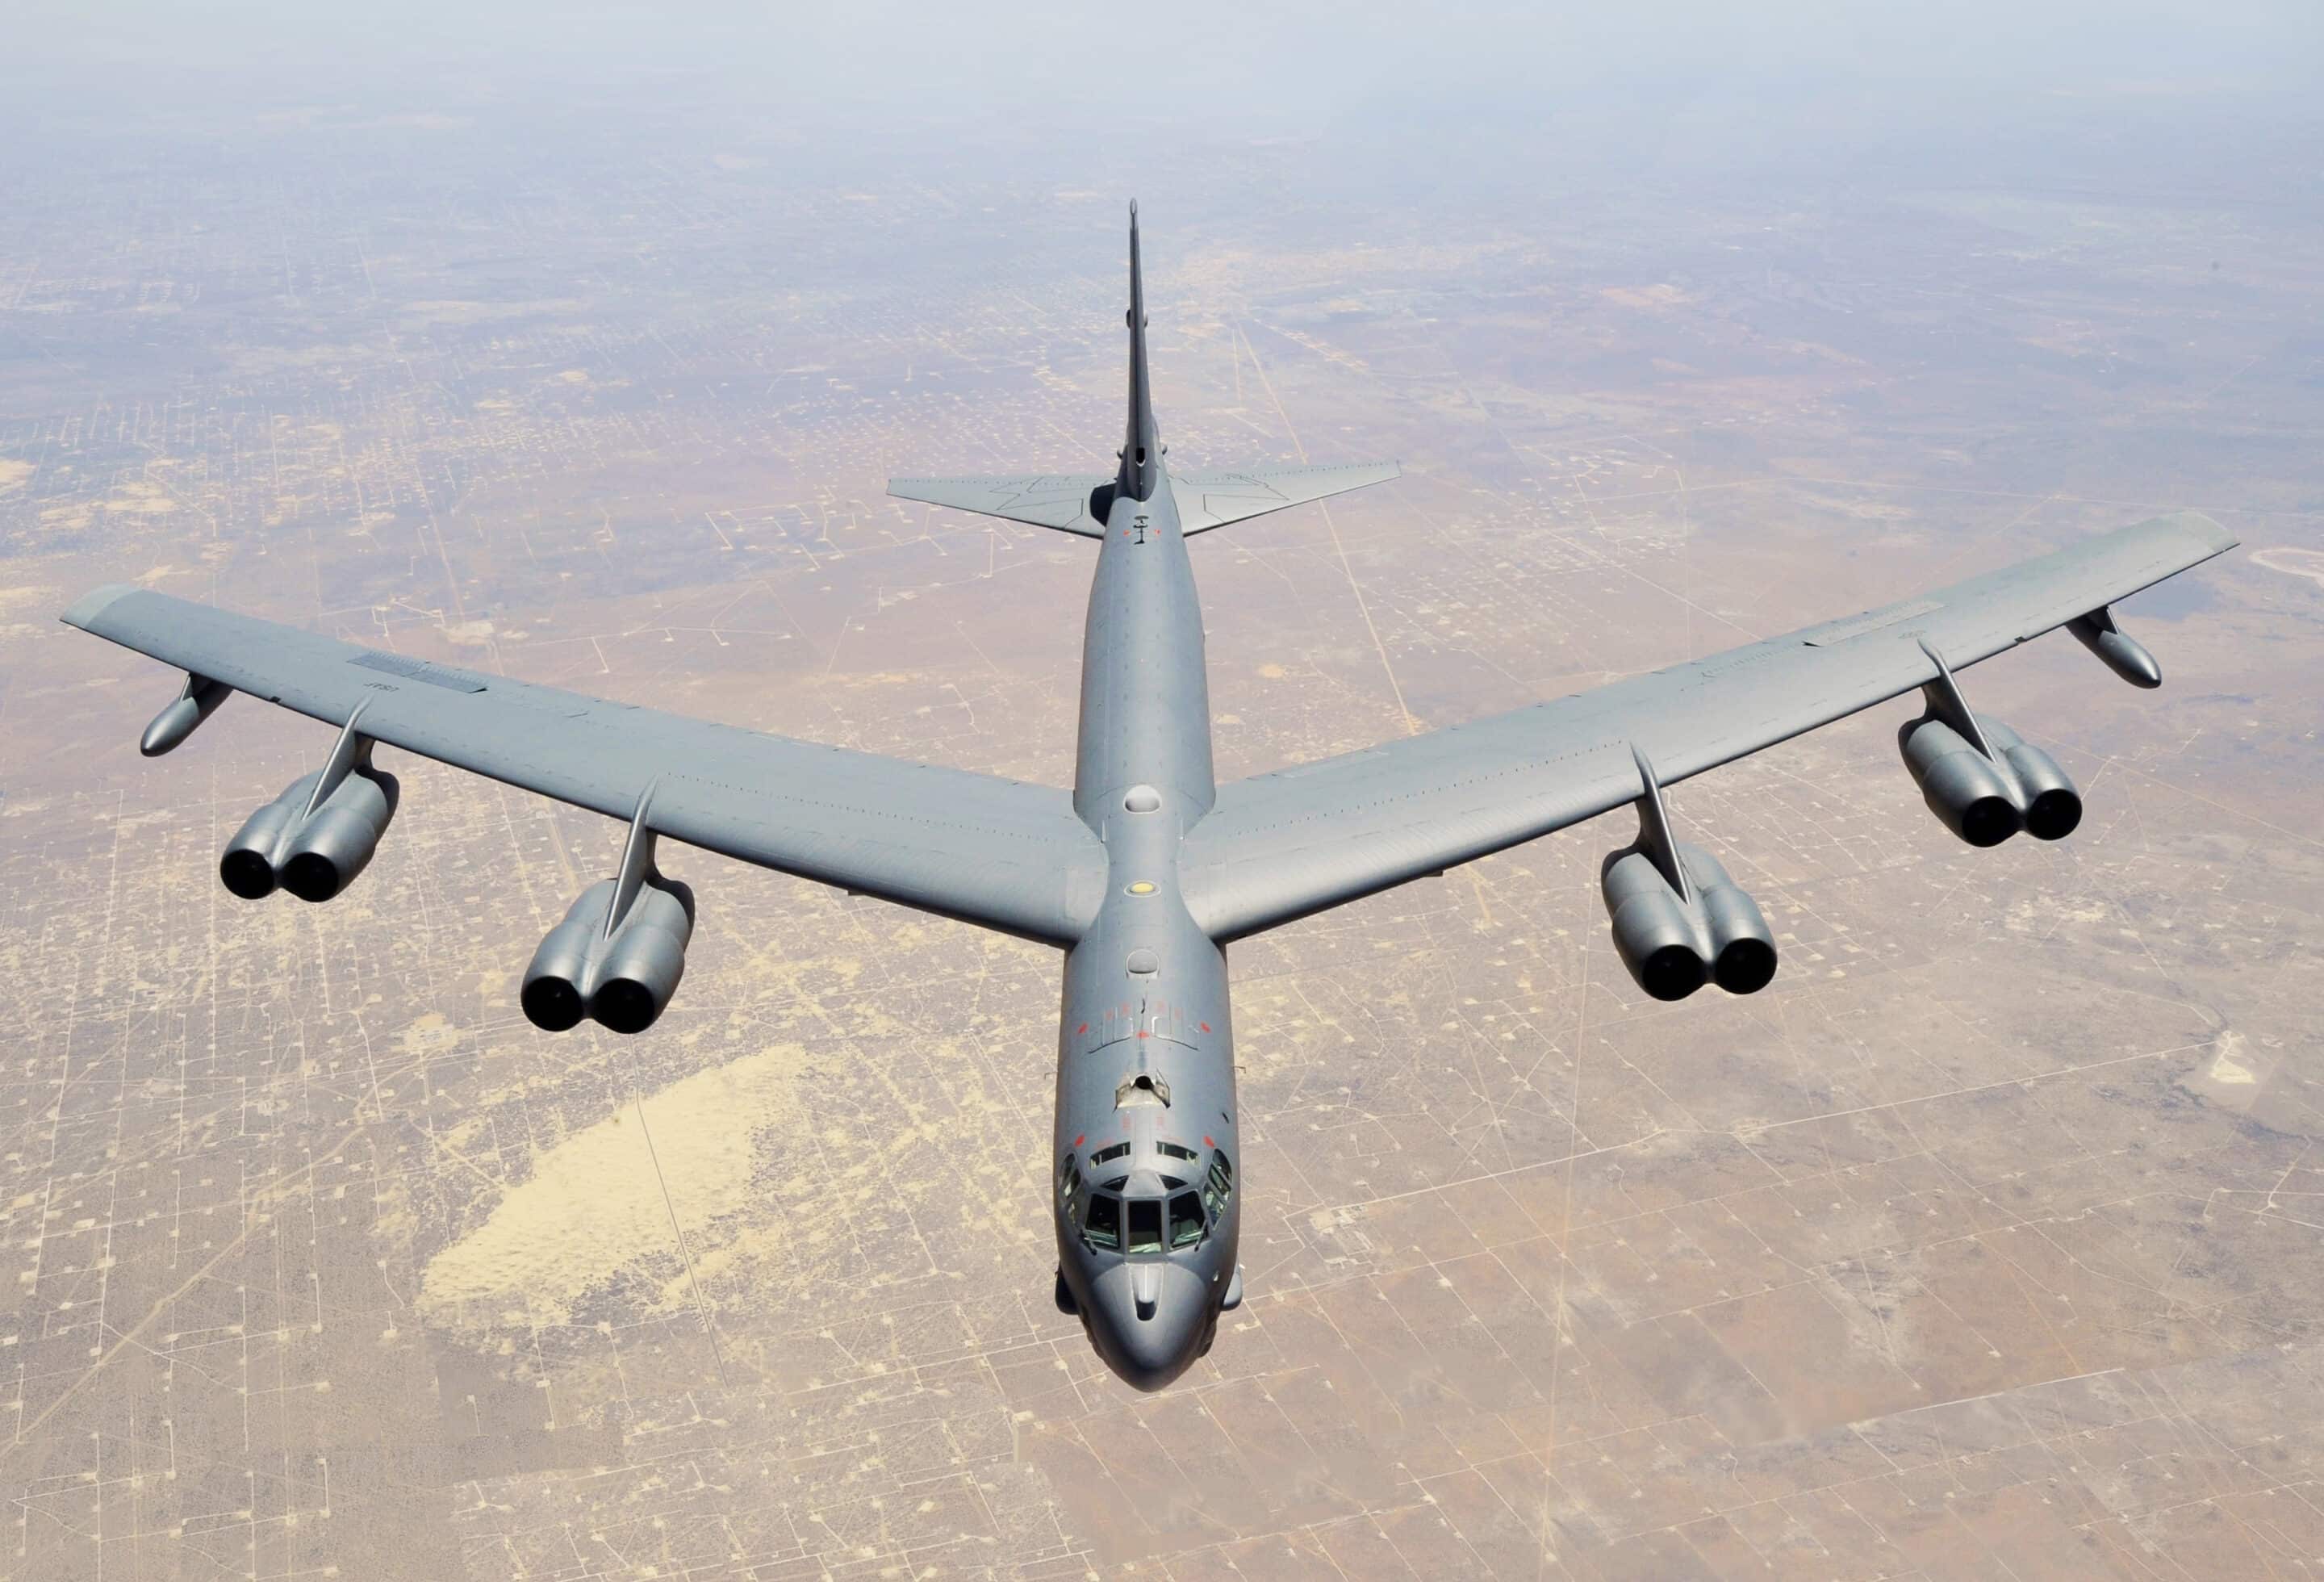 b 52 stratofortress assigned to the 307th bomb wing (cropped)